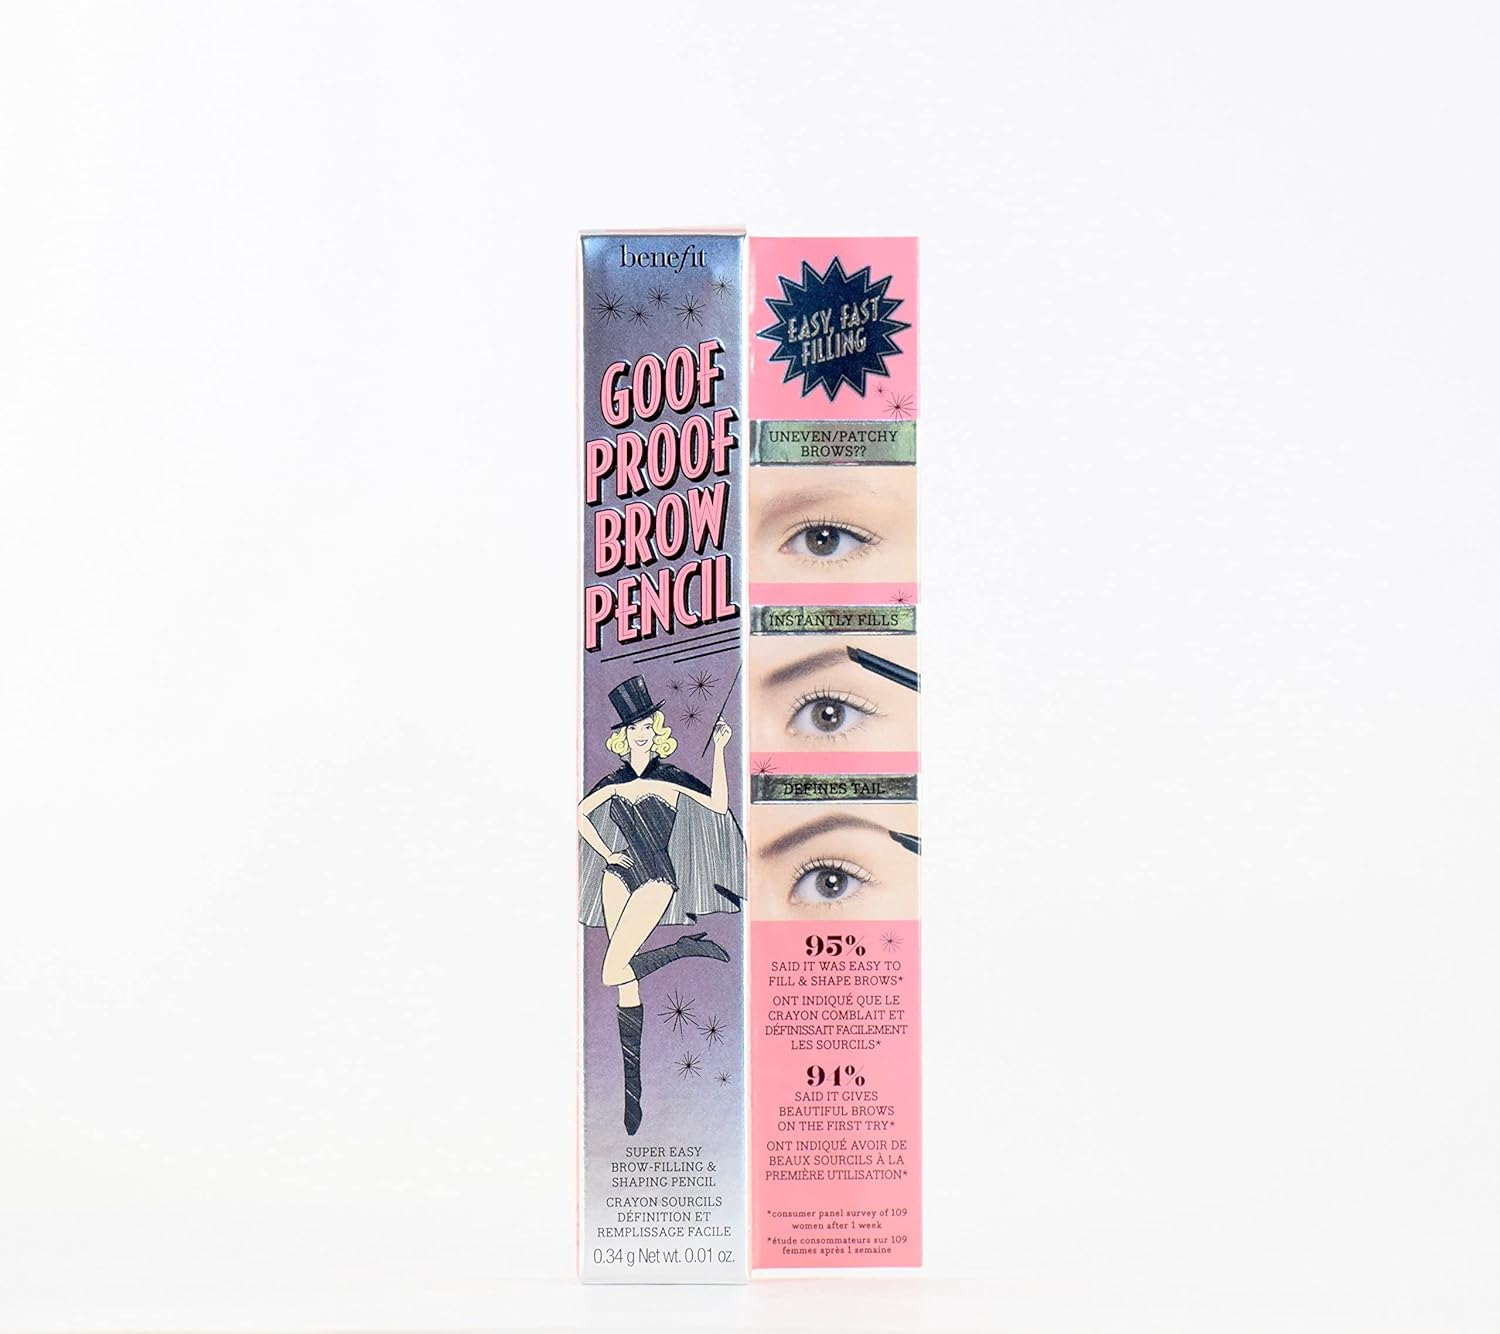 Benefit Goof Proof Brow Pencil Super Easy Eyebrow Shaping and Filling Tool - Shade 2